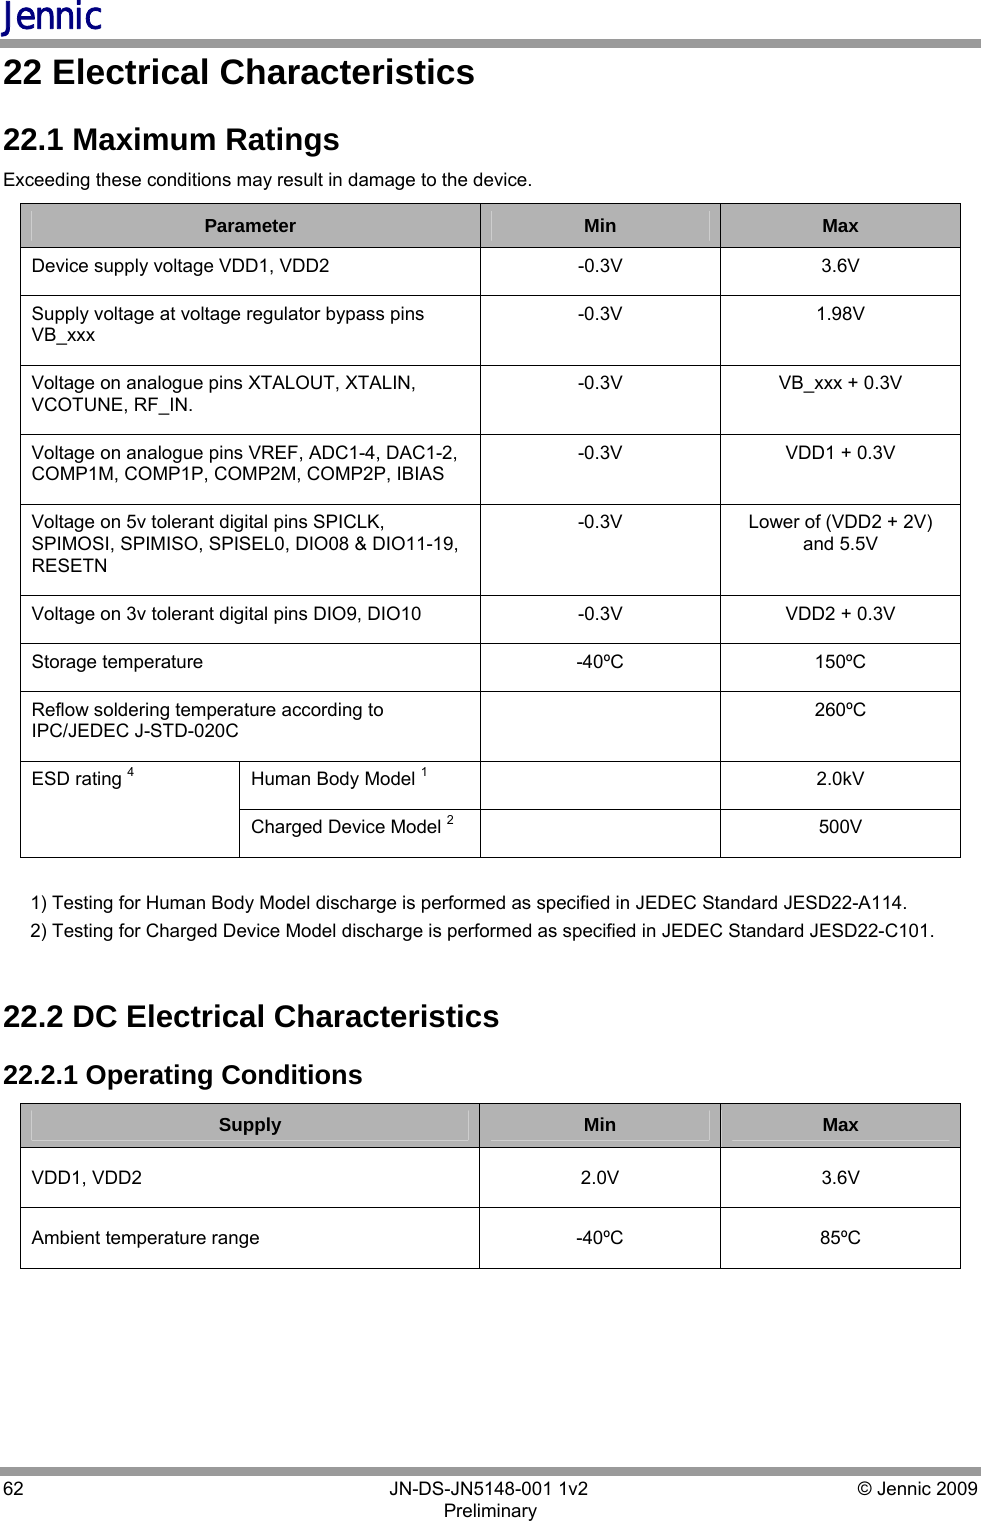 Jennic 62        JN-DS-JN5148-001 1v2  © Jennic 2009 Preliminary  22 Electrical Characteristics 22.1 Maximum Ratings Exceeding these conditions may result in damage to the device. Parameter  Min  Max Device supply voltage VDD1, VDD2  -0.3V  3.6V Supply voltage at voltage regulator bypass pins VB_xxx -0.3V 1.98V Voltage on analogue pins XTALOUT, XTALIN, VCOTUNE, RF_IN.  -0.3V  VB_xxx + 0.3V Voltage on analogue pins VREF, ADC1-4, DAC1-2, COMP1M, COMP1P, COMP2M, COMP2P, IBIAS -0.3V  VDD1 + 0.3V Voltage on 5v tolerant digital pins SPICLK, SPIMOSI, SPIMISO, SPISEL0, DIO08 &amp; DIO11-19, RESETN -0.3V  Lower of (VDD2 + 2V) and 5.5V Voltage on 3v tolerant digital pins DIO9, DIO10  -0.3V  VDD2 + 0.3V Storage temperature  -40ºC  150ºC Reflow soldering temperature according to IPC/JEDEC J-STD-020C  260ºC Human Body Model 1   2.0kV ESD rating 4 Charged Device Model 2   500V  1) Testing for Human Body Model discharge is performed as specified in JEDEC Standard JESD22-A114. 2) Testing for Charged Device Model discharge is performed as specified in JEDEC Standard JESD22-C101.  22.2 DC Electrical Characteristics 22.2.1 Operating Conditions Supply  Min  Max VDD1, VDD2  2.0V  3.6V Ambient temperature range  -40ºC  85ºC 